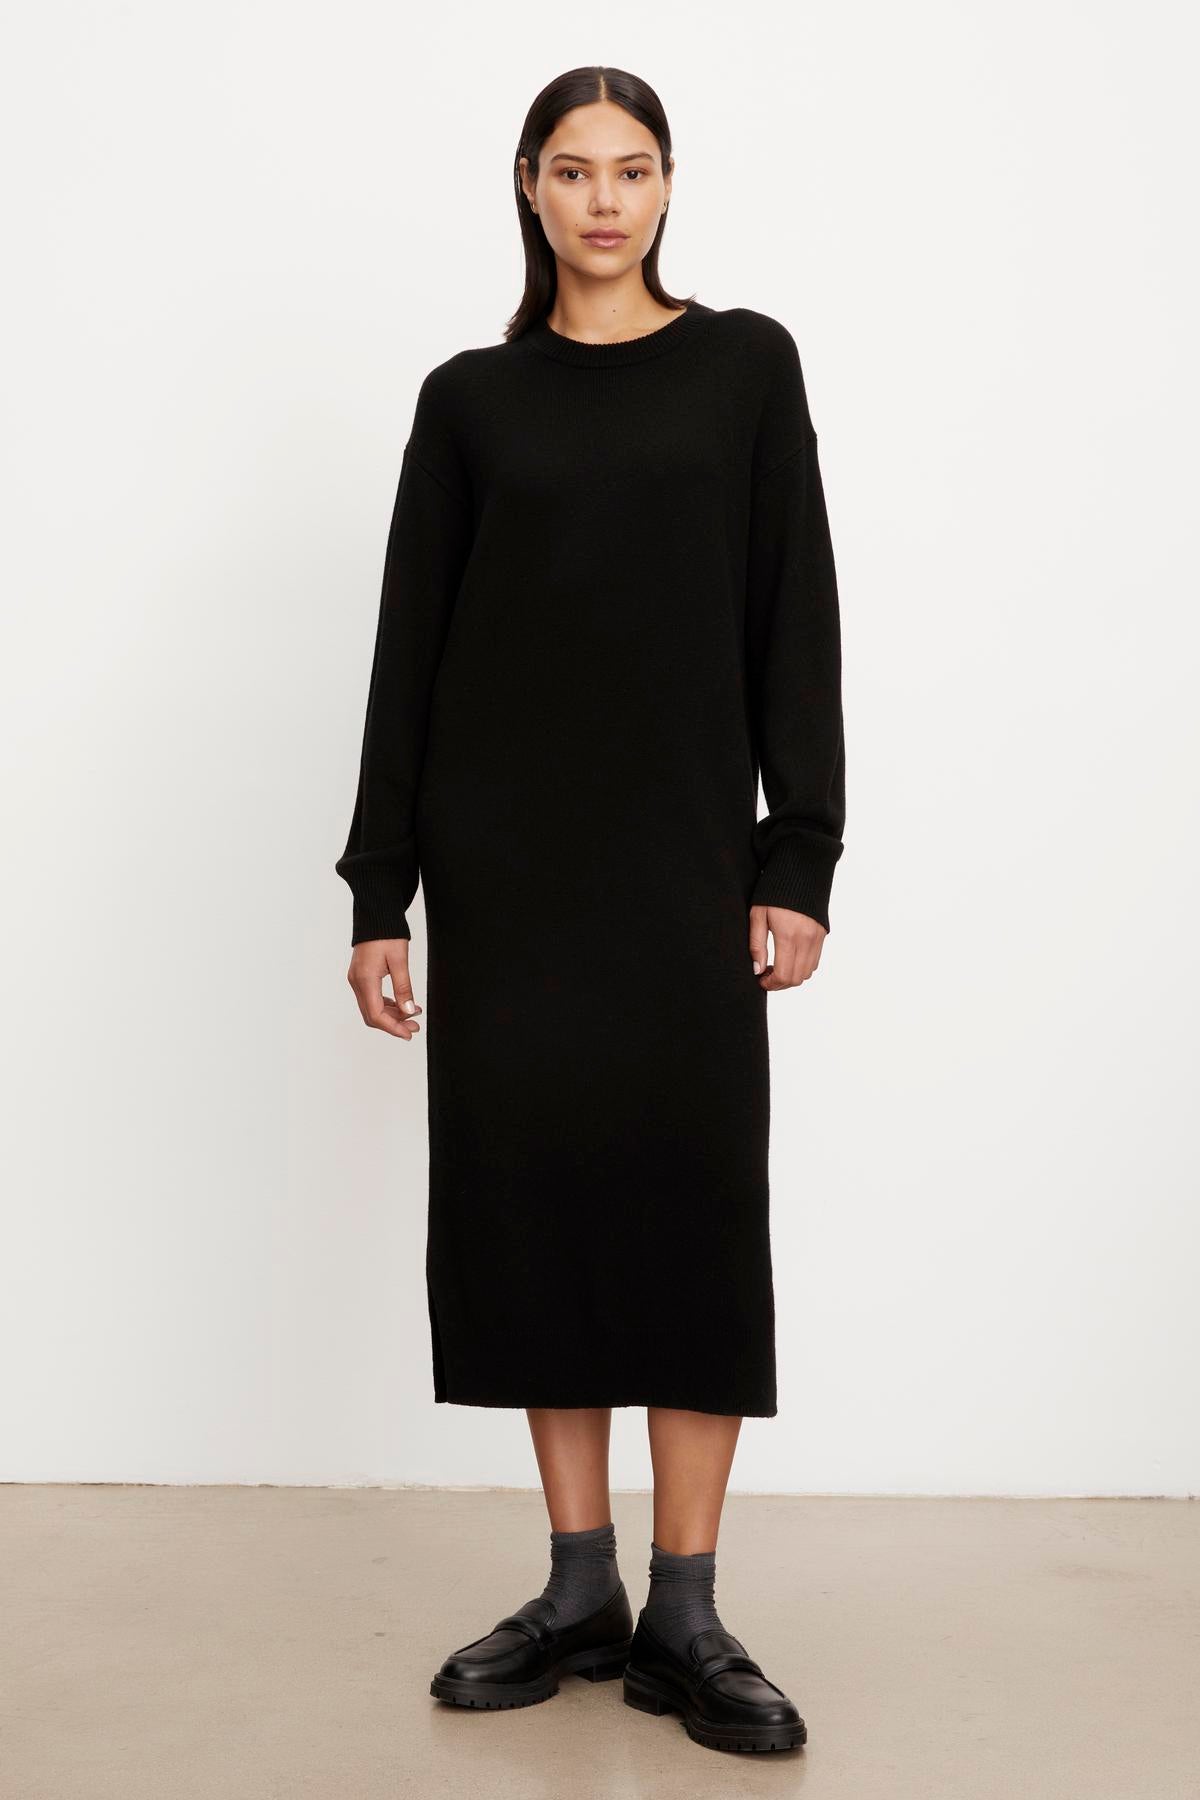 A woman in a Kaden sweater dress by Velvet by Graham & Spencer with a crew neckline and black loafers standing against a plain white background.-35654462537921